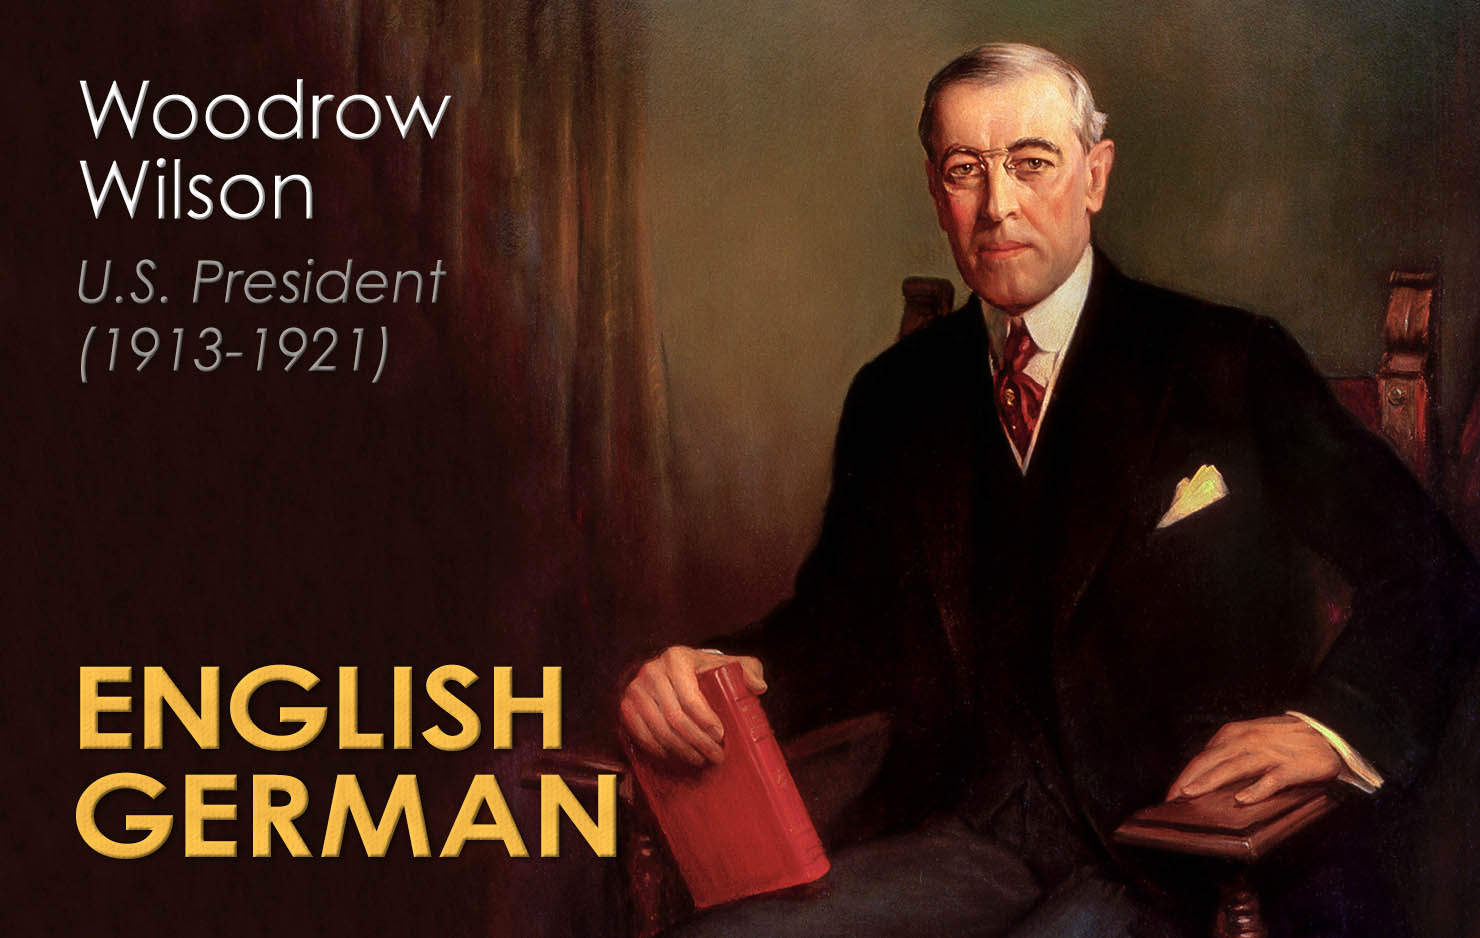 Woodrow Wilson learned German as part of earning his Ph.D. in history and political science from Johns Hopkins University.